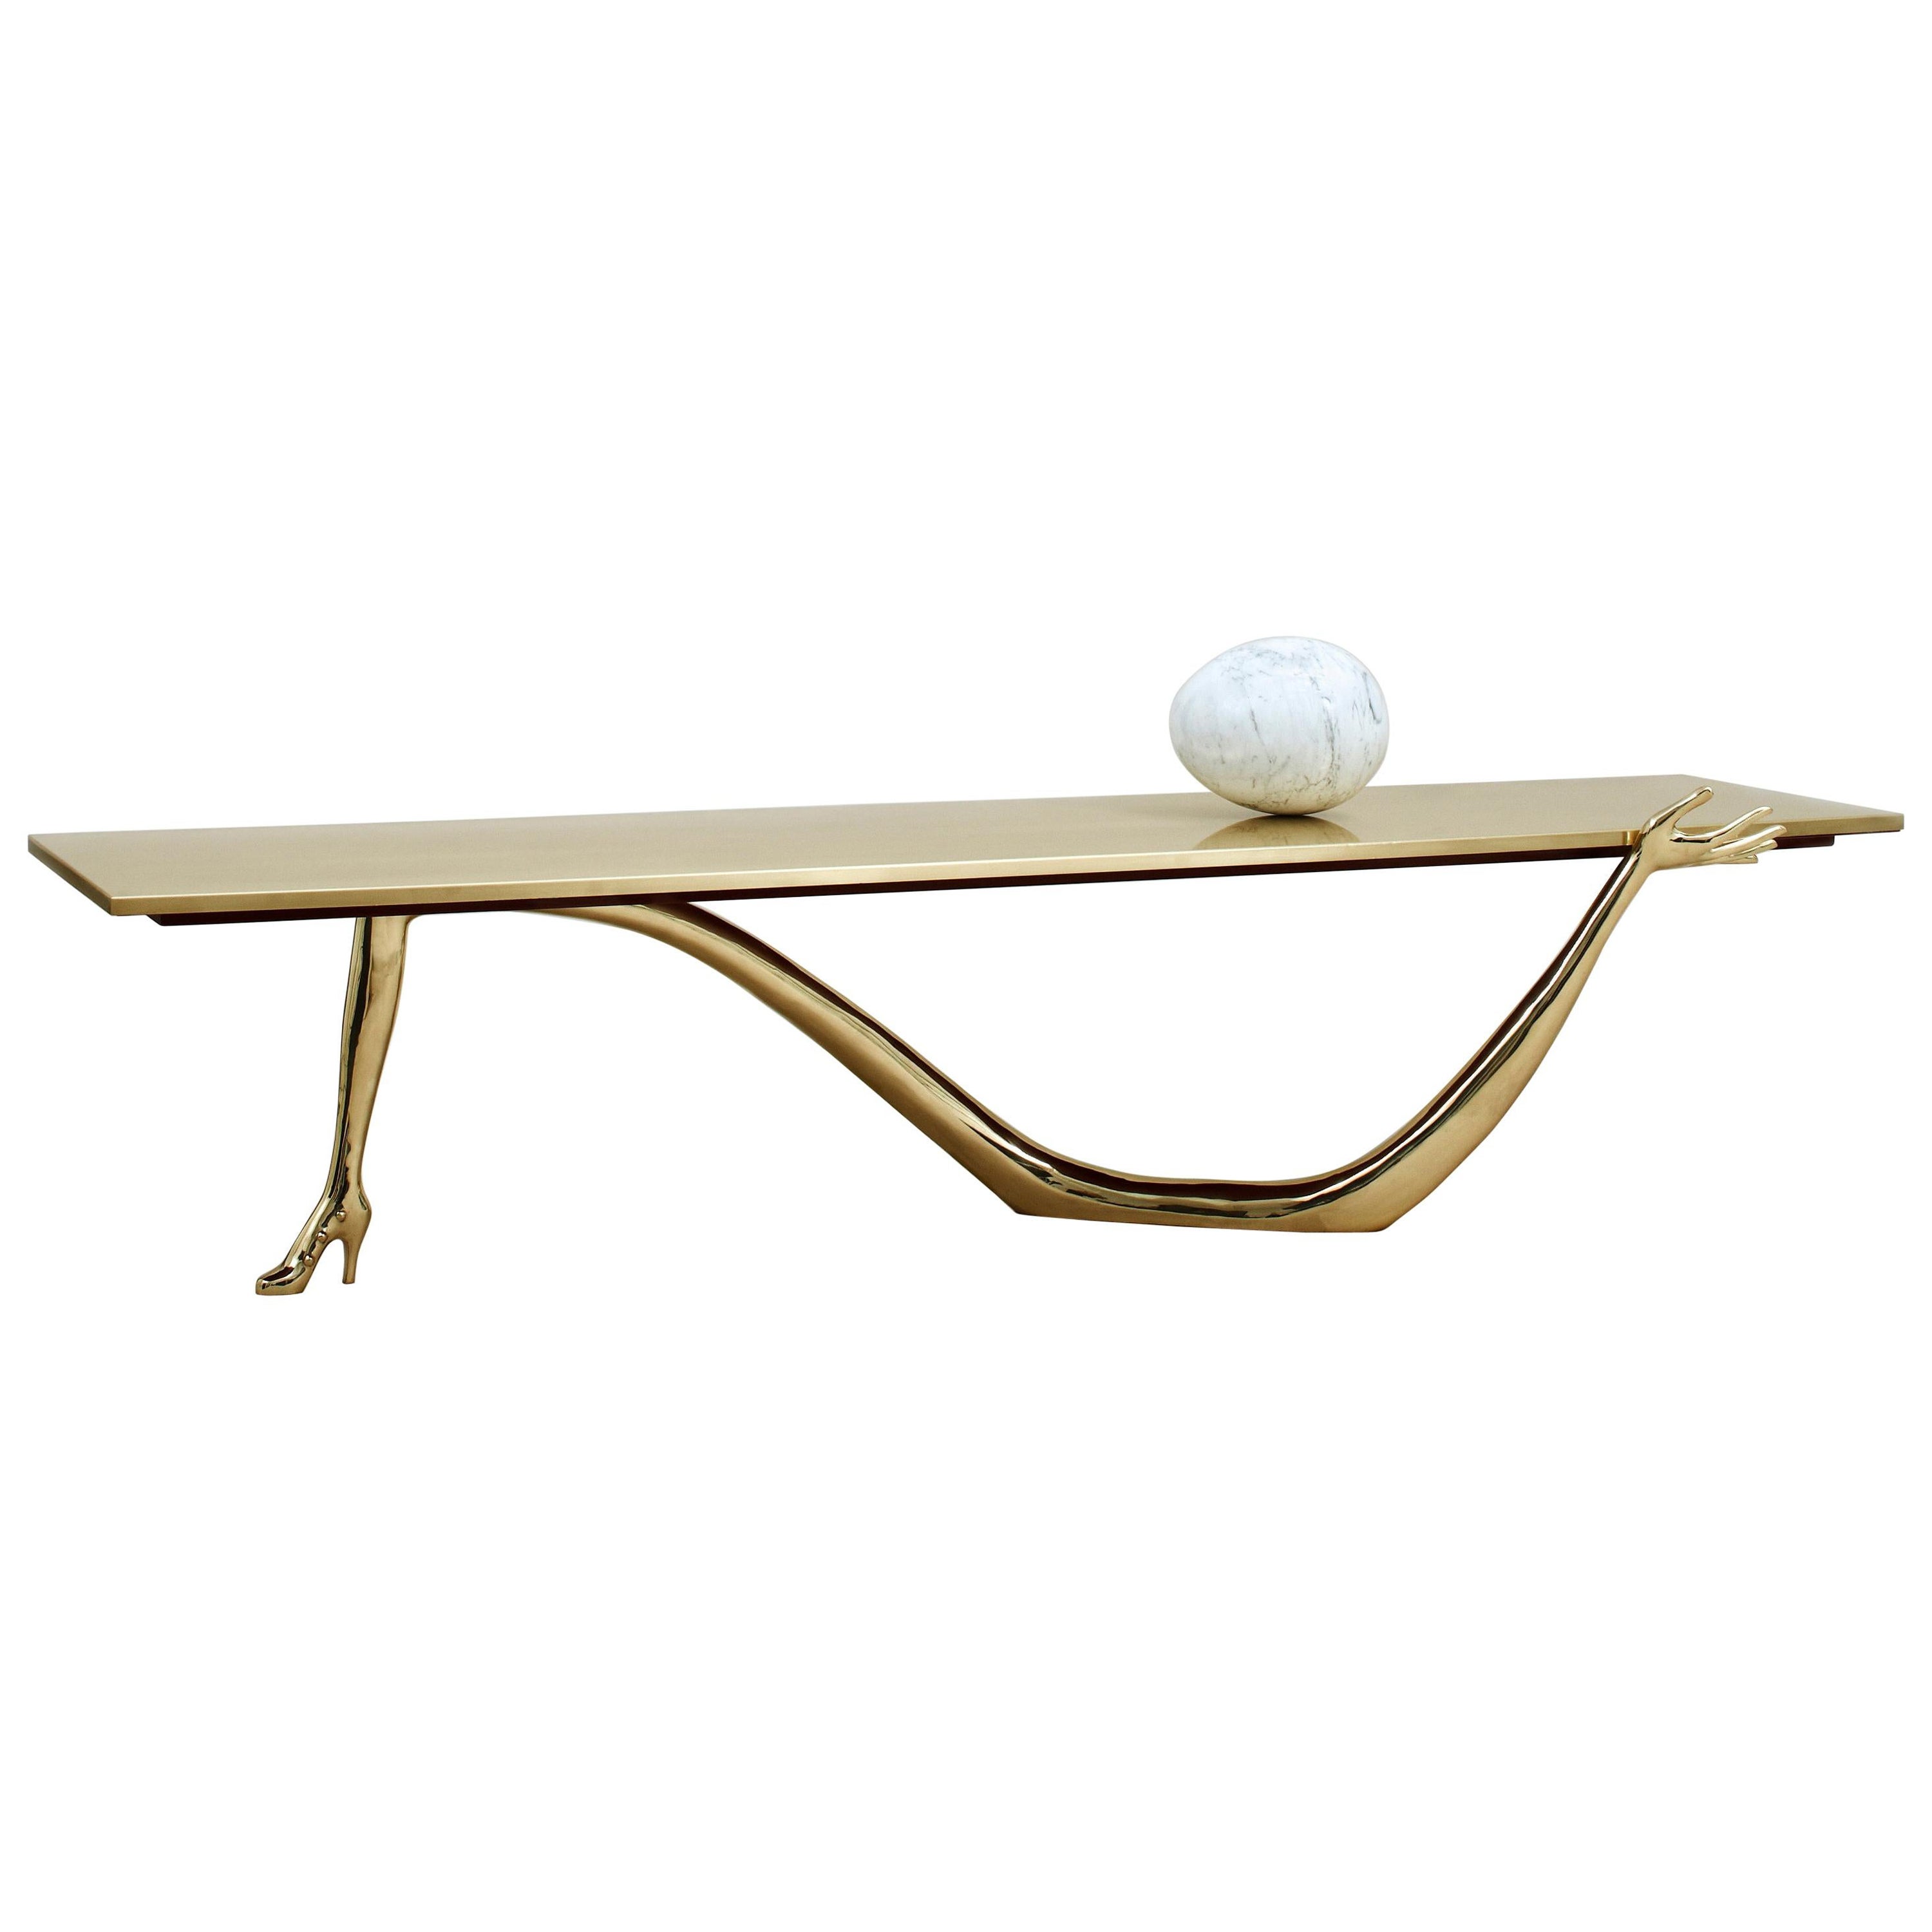 20th Century Spanish Surrealist brass "Leda" coffee table by Salvador Dalí  For Sale